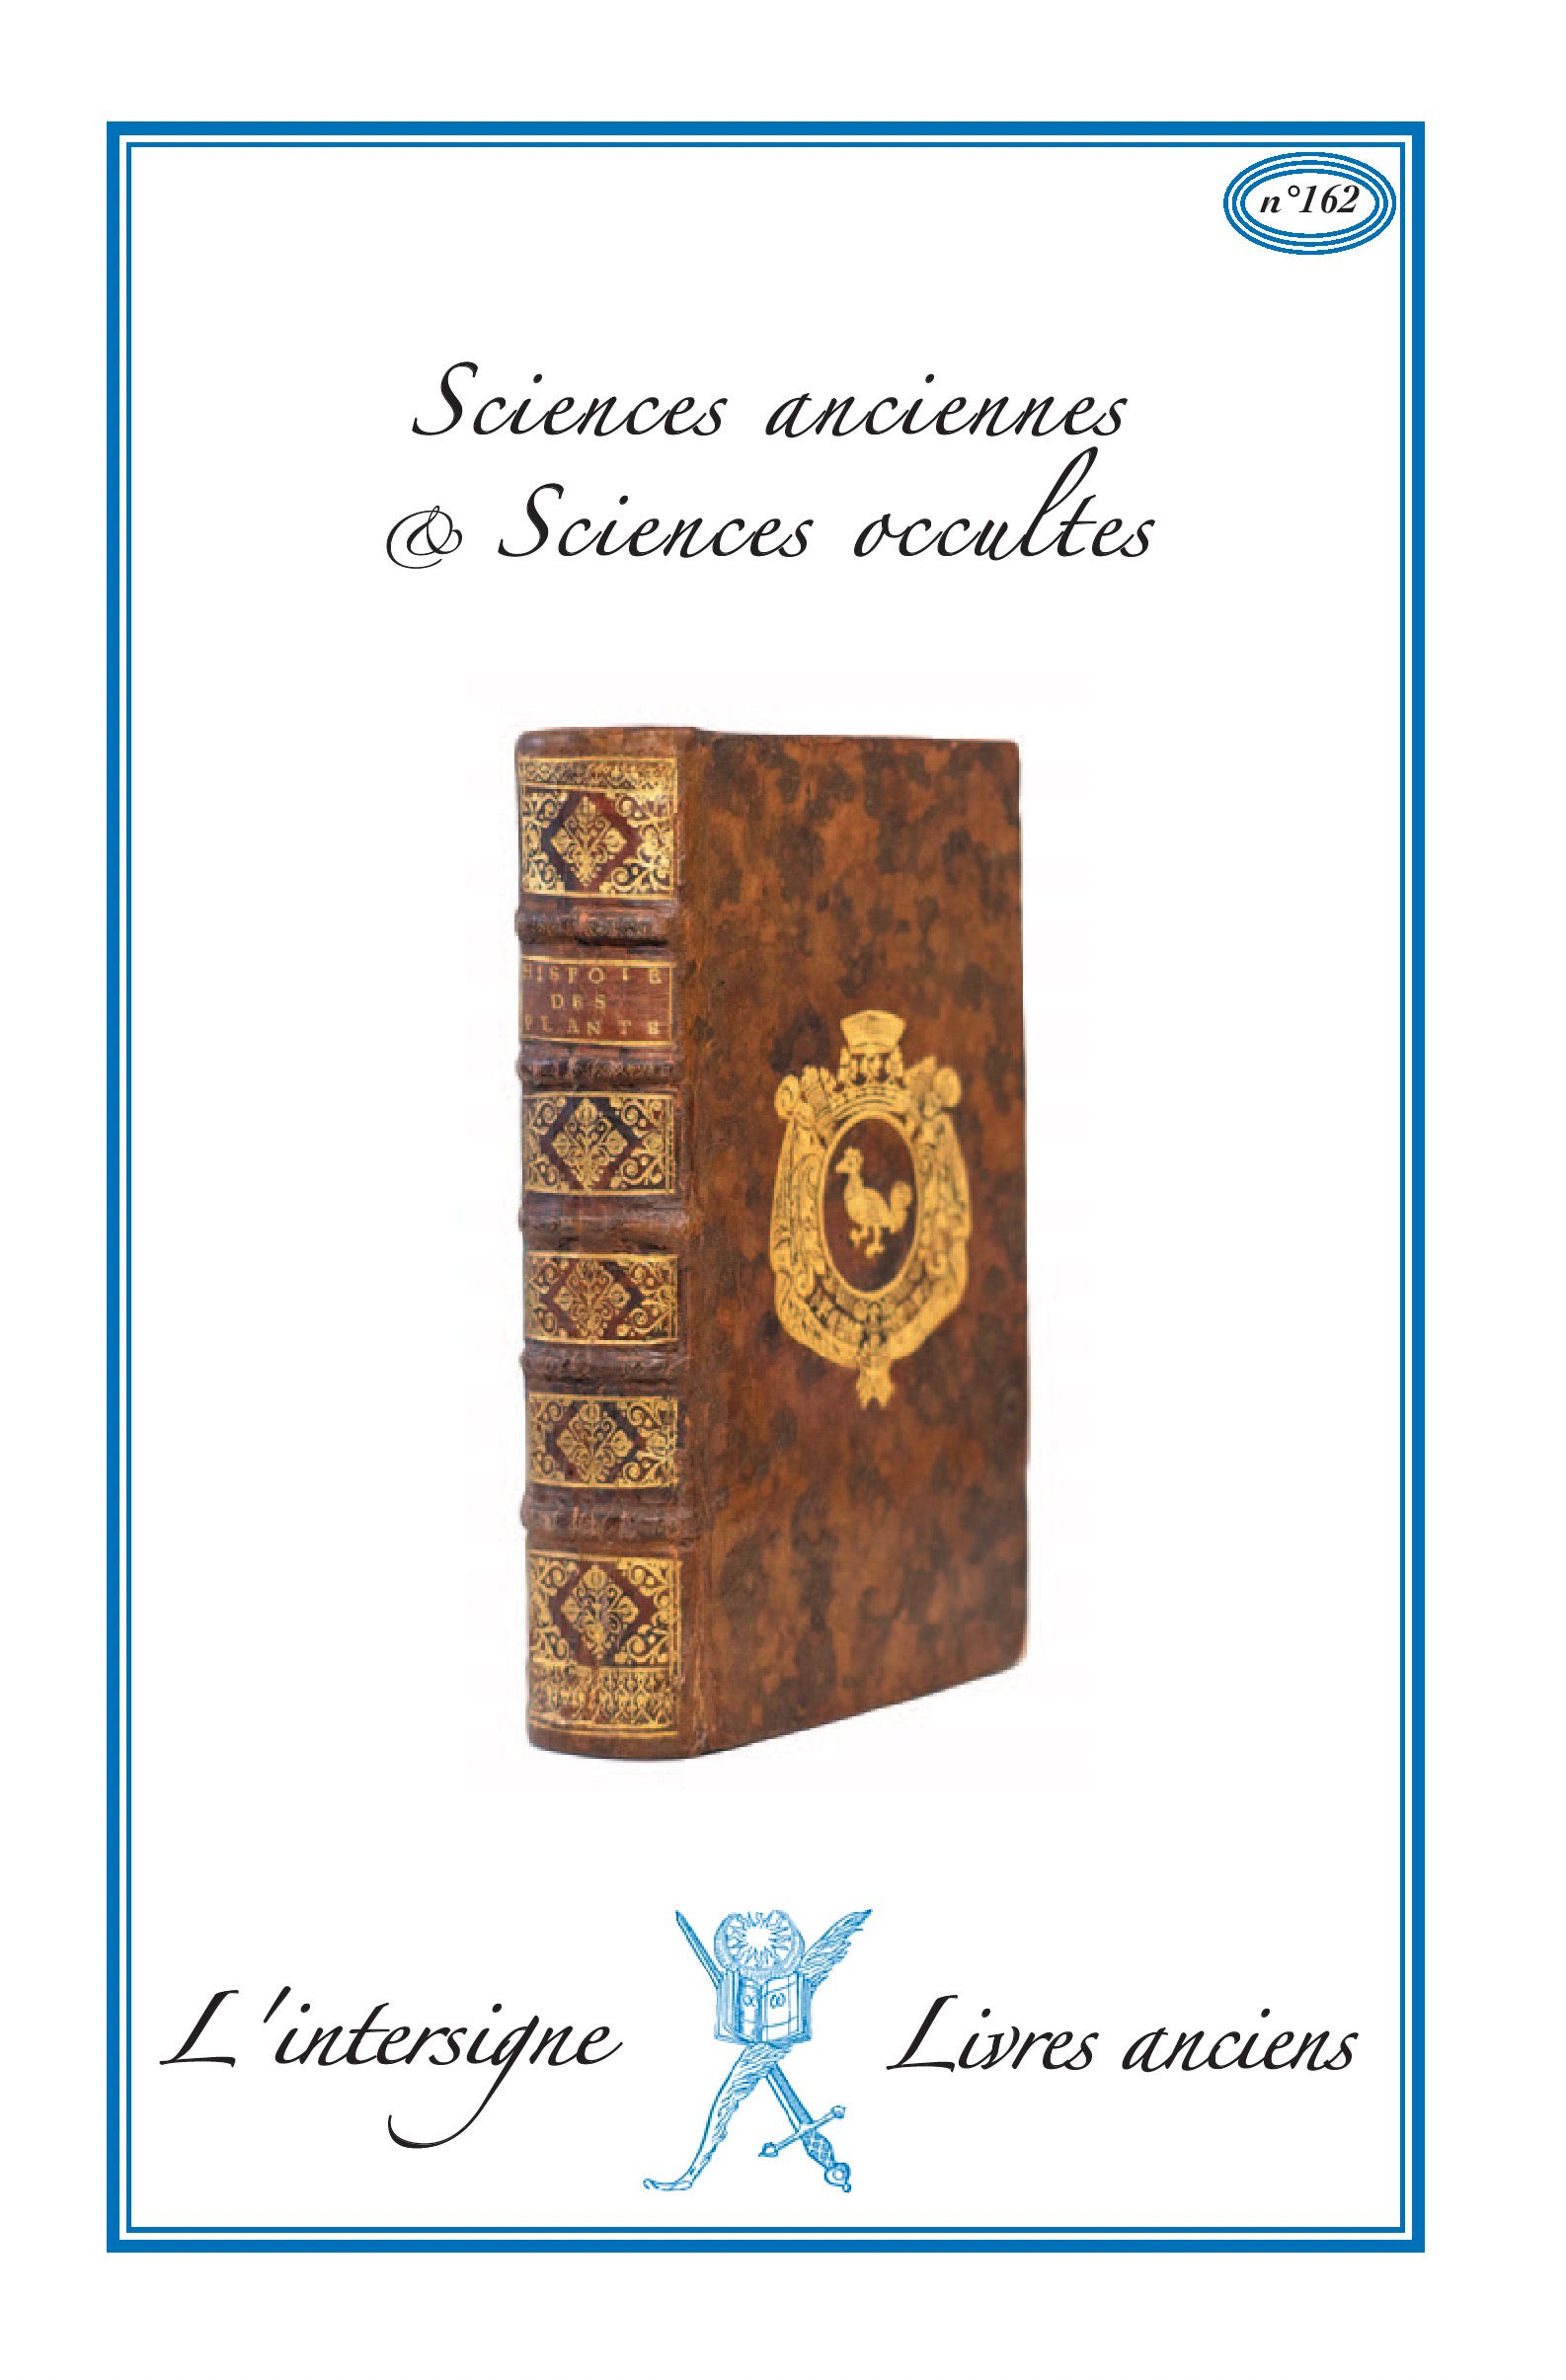 n°162 Sciences anciennes & occultes 